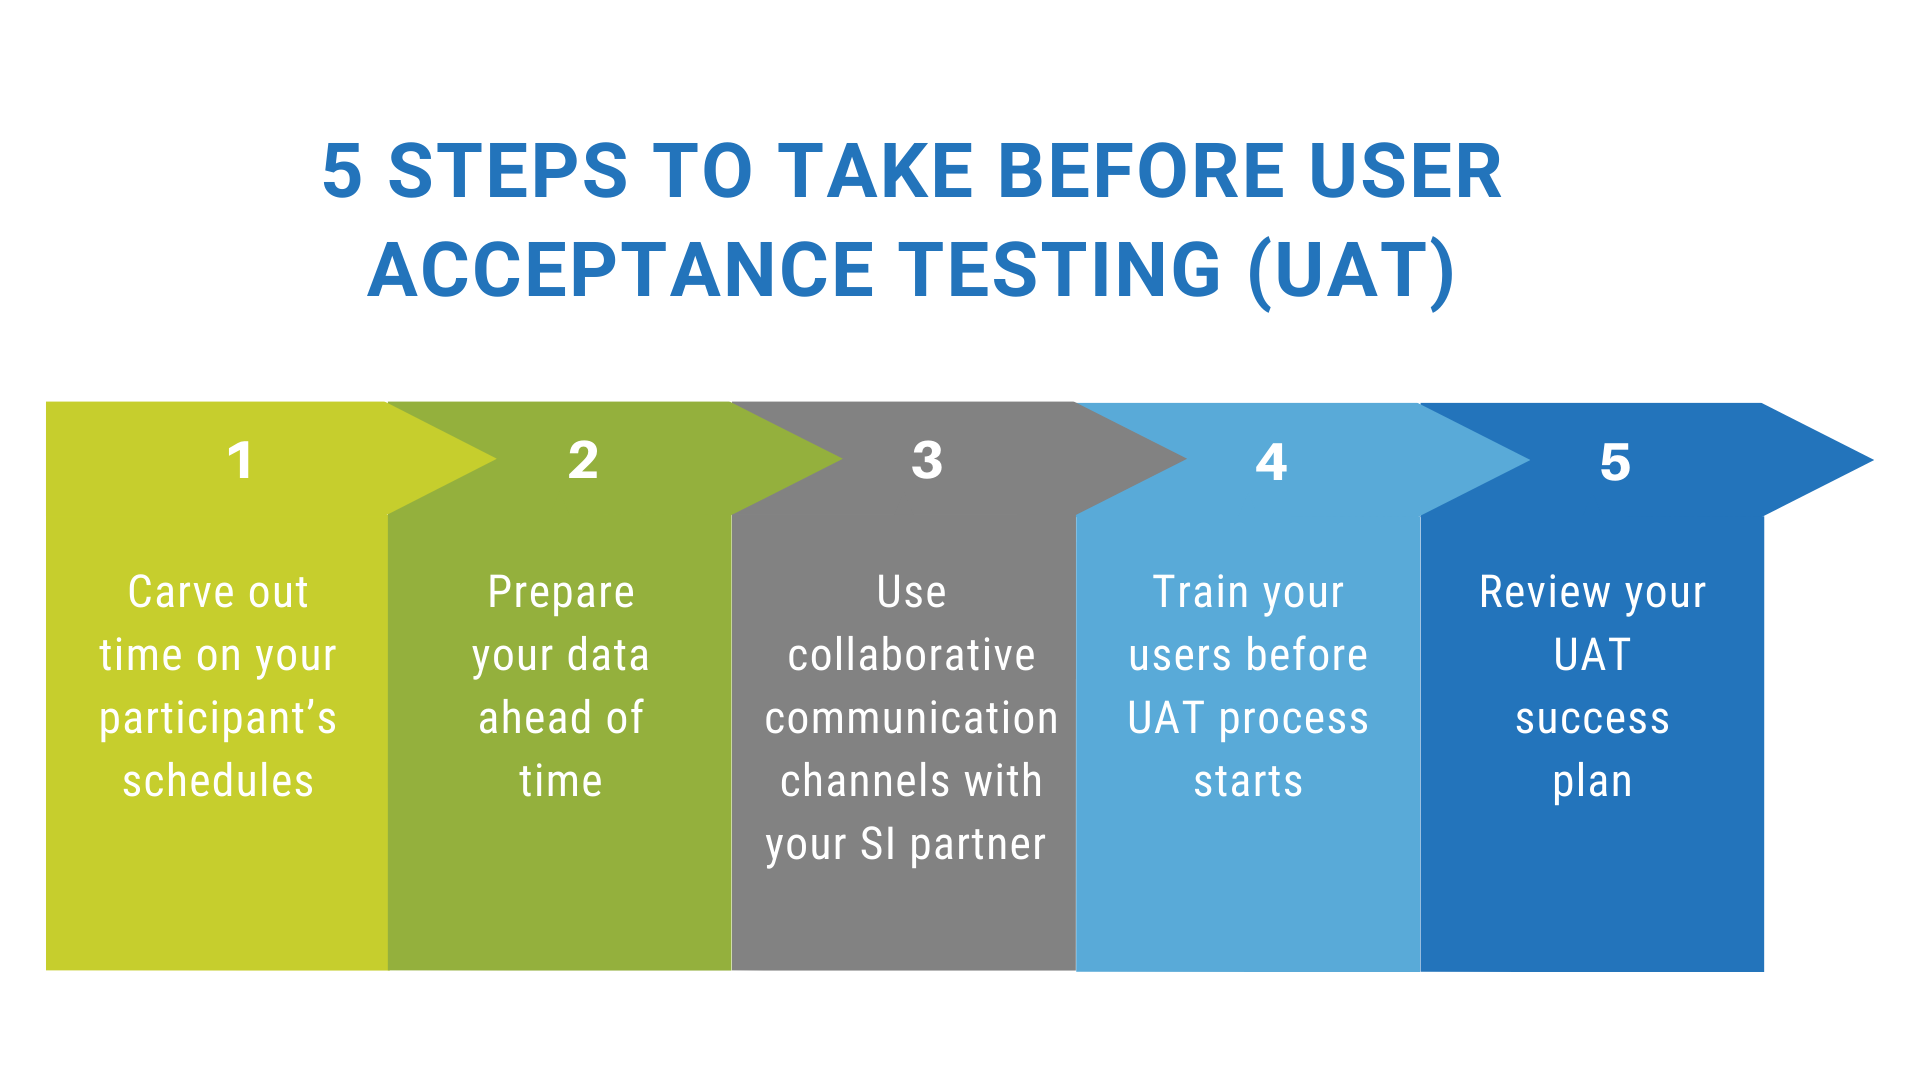 5 Steps to Take Before User Acceptance Testing (UAT)